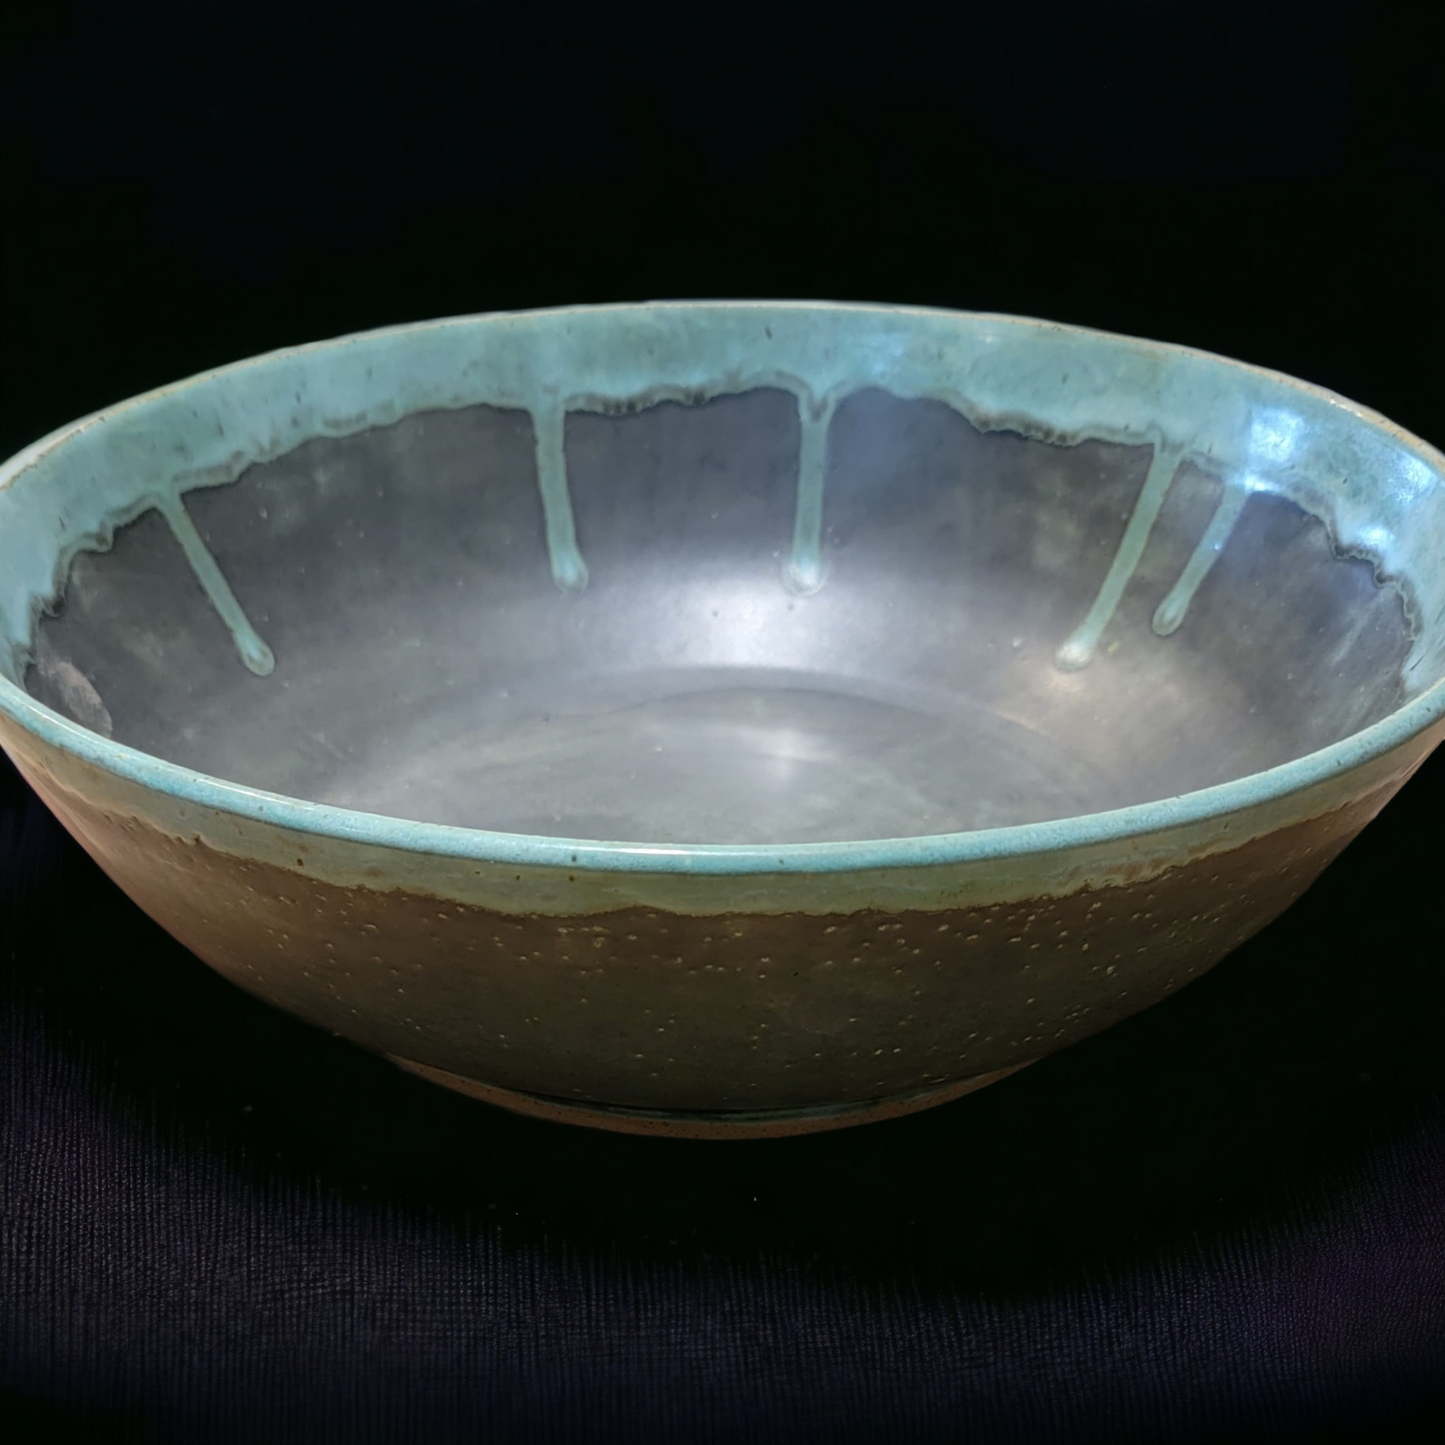 Large Oxidized Copper Colored Bowl - #79